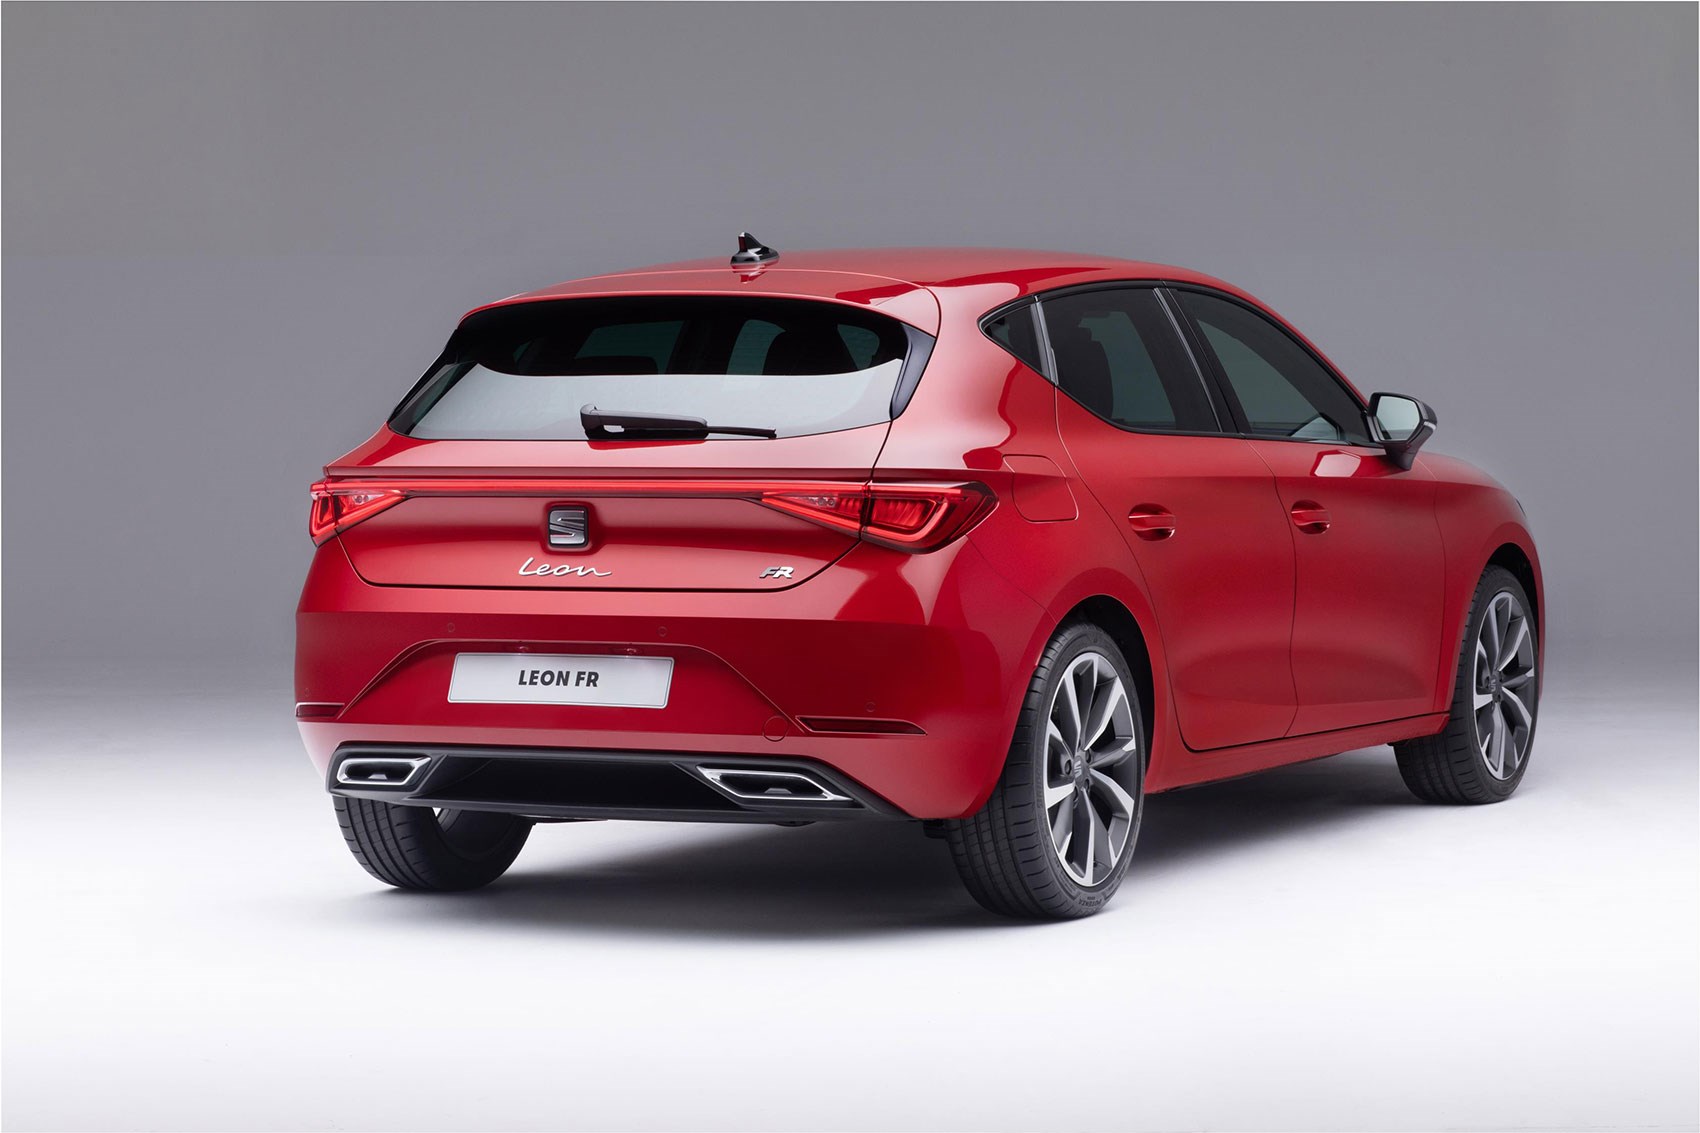 Seat Leon Photos and Specs. Photo: Seat Leon Specifications and 8 perfect  photos of Seat Leon